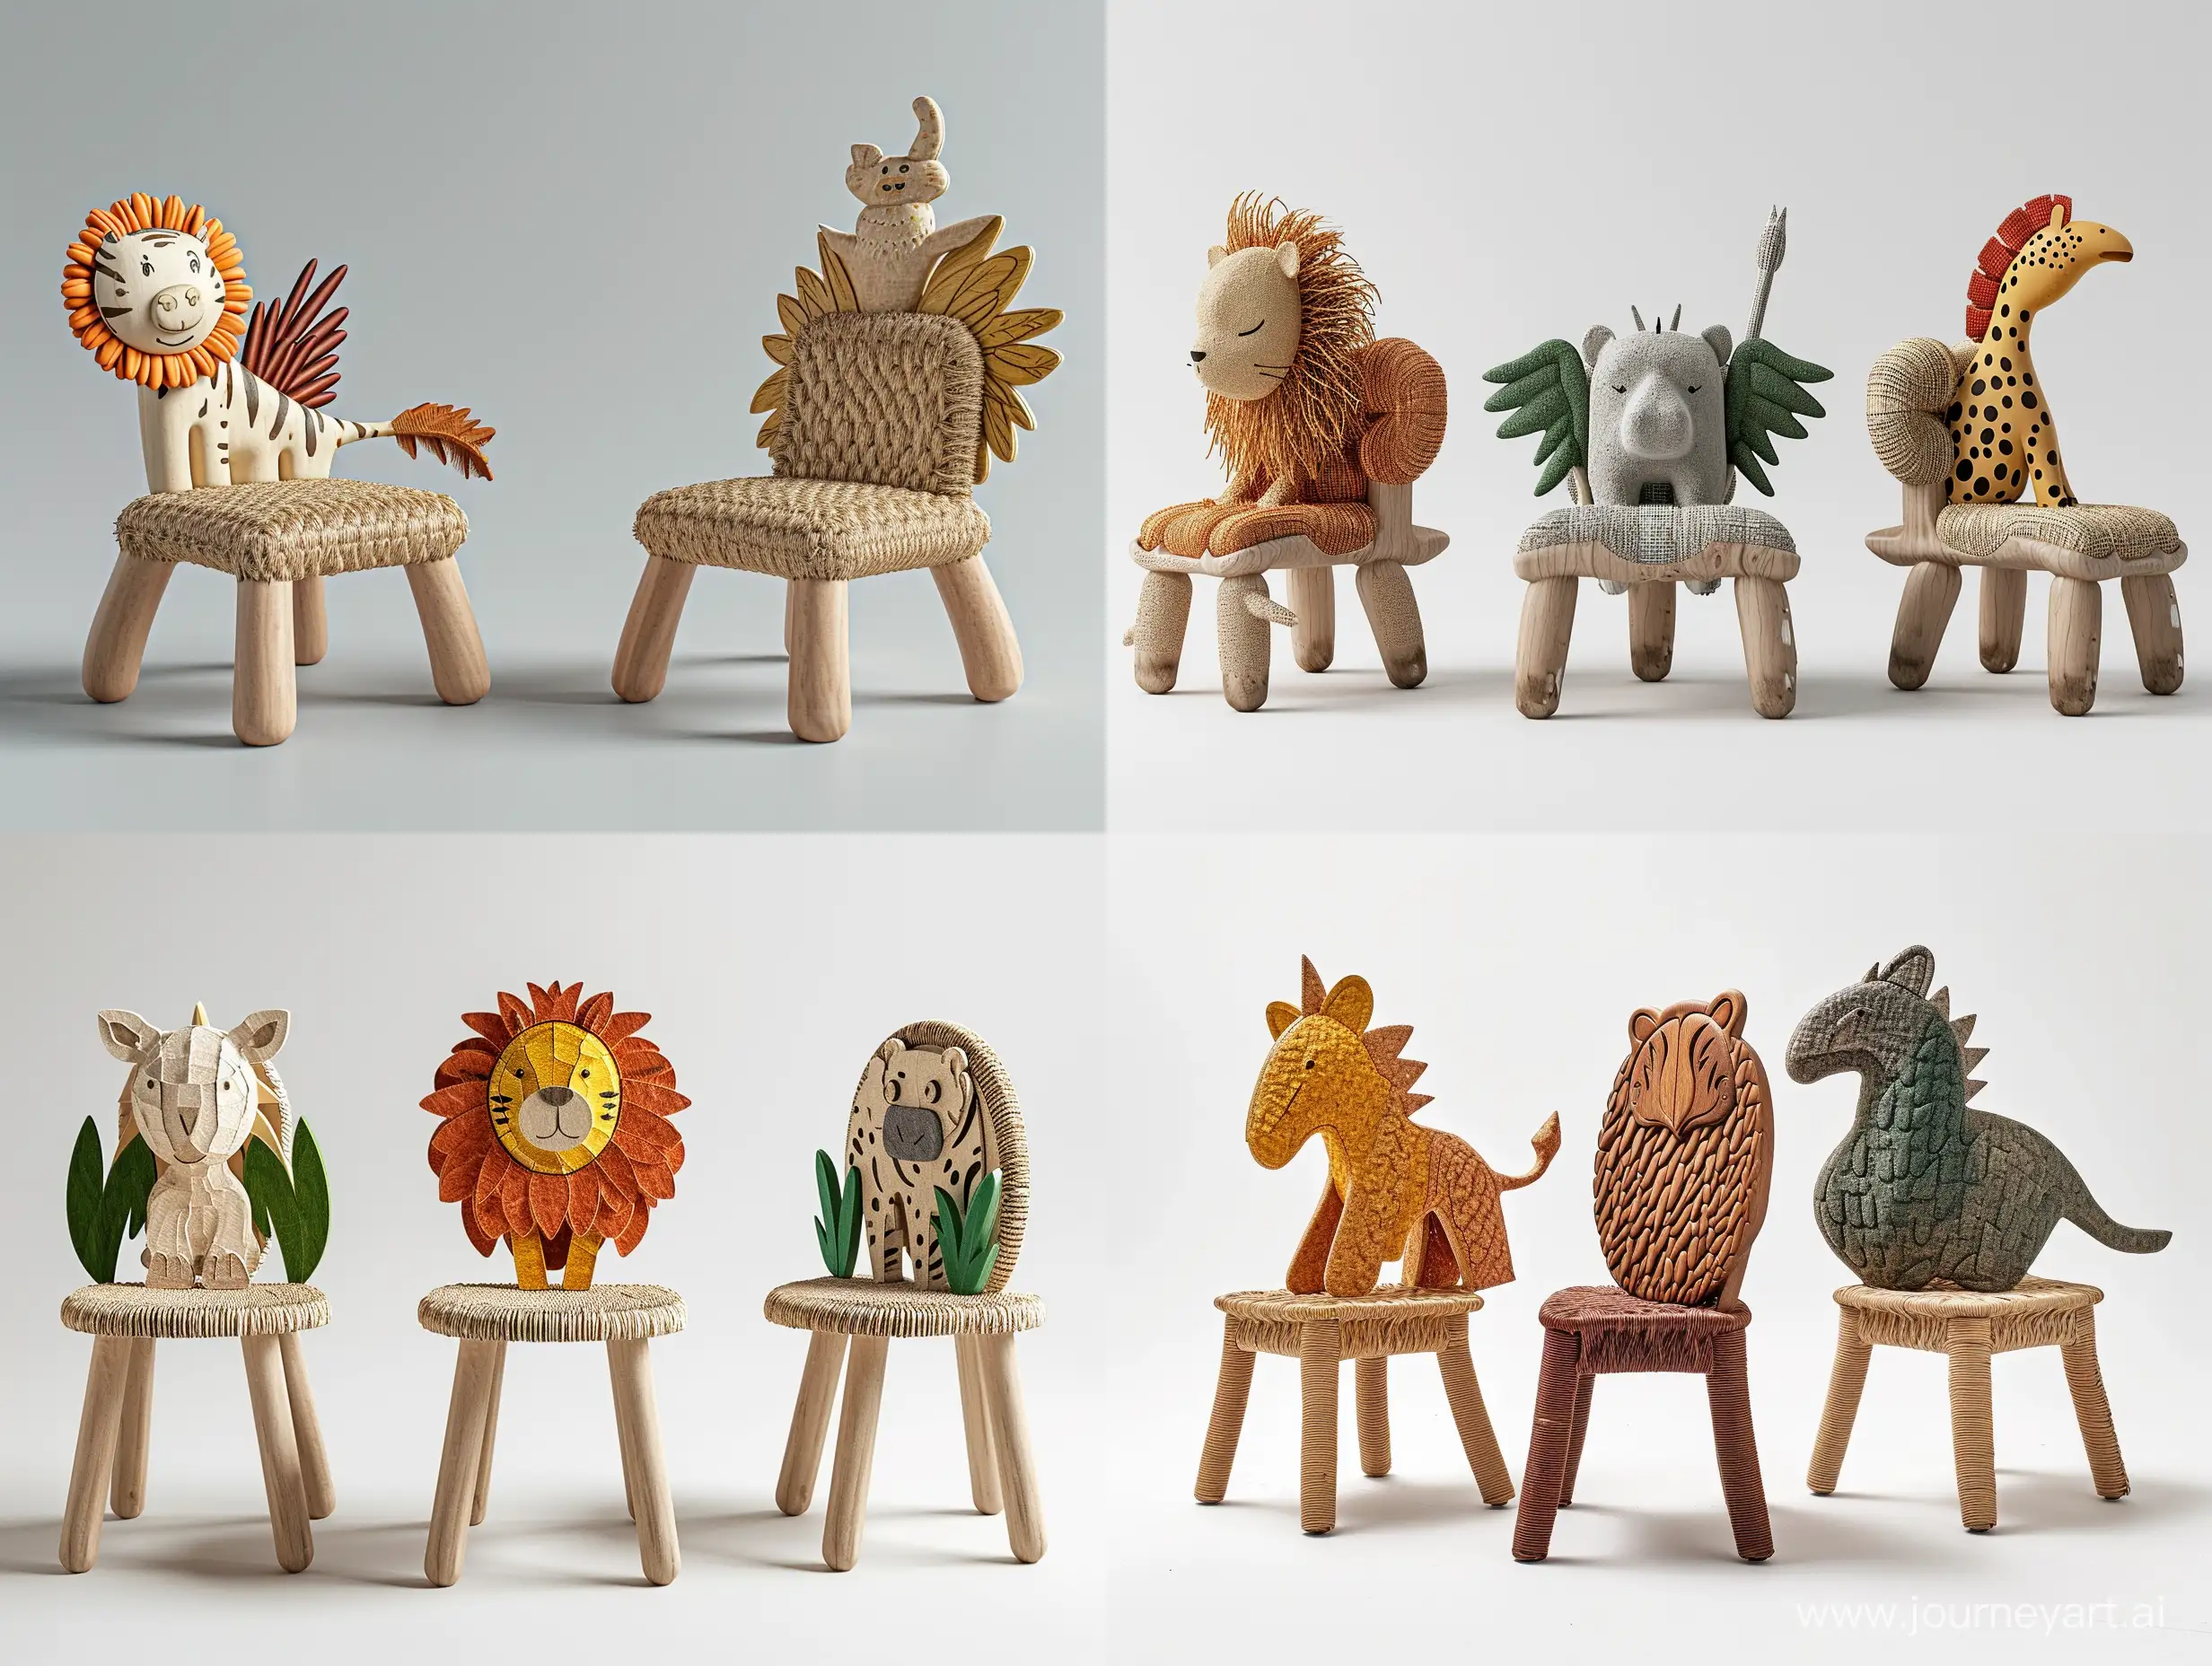 imagine an image of a minimal kids friendly  sturdy children’s chair which can be assembled and disassembled and inspired by Children's drawing of cute safari animals like cute lion or zebra or griffin or cheetah or hippocampus , with backrests shaped like different creatures. Use recycled wood for the frame and woven plant fibers for seating areas, depicted in colors representative of the chosen animals. The seat should stand approximately 30cm tall, built to educate about wildlife and ensure durability.unreal ,realistic style